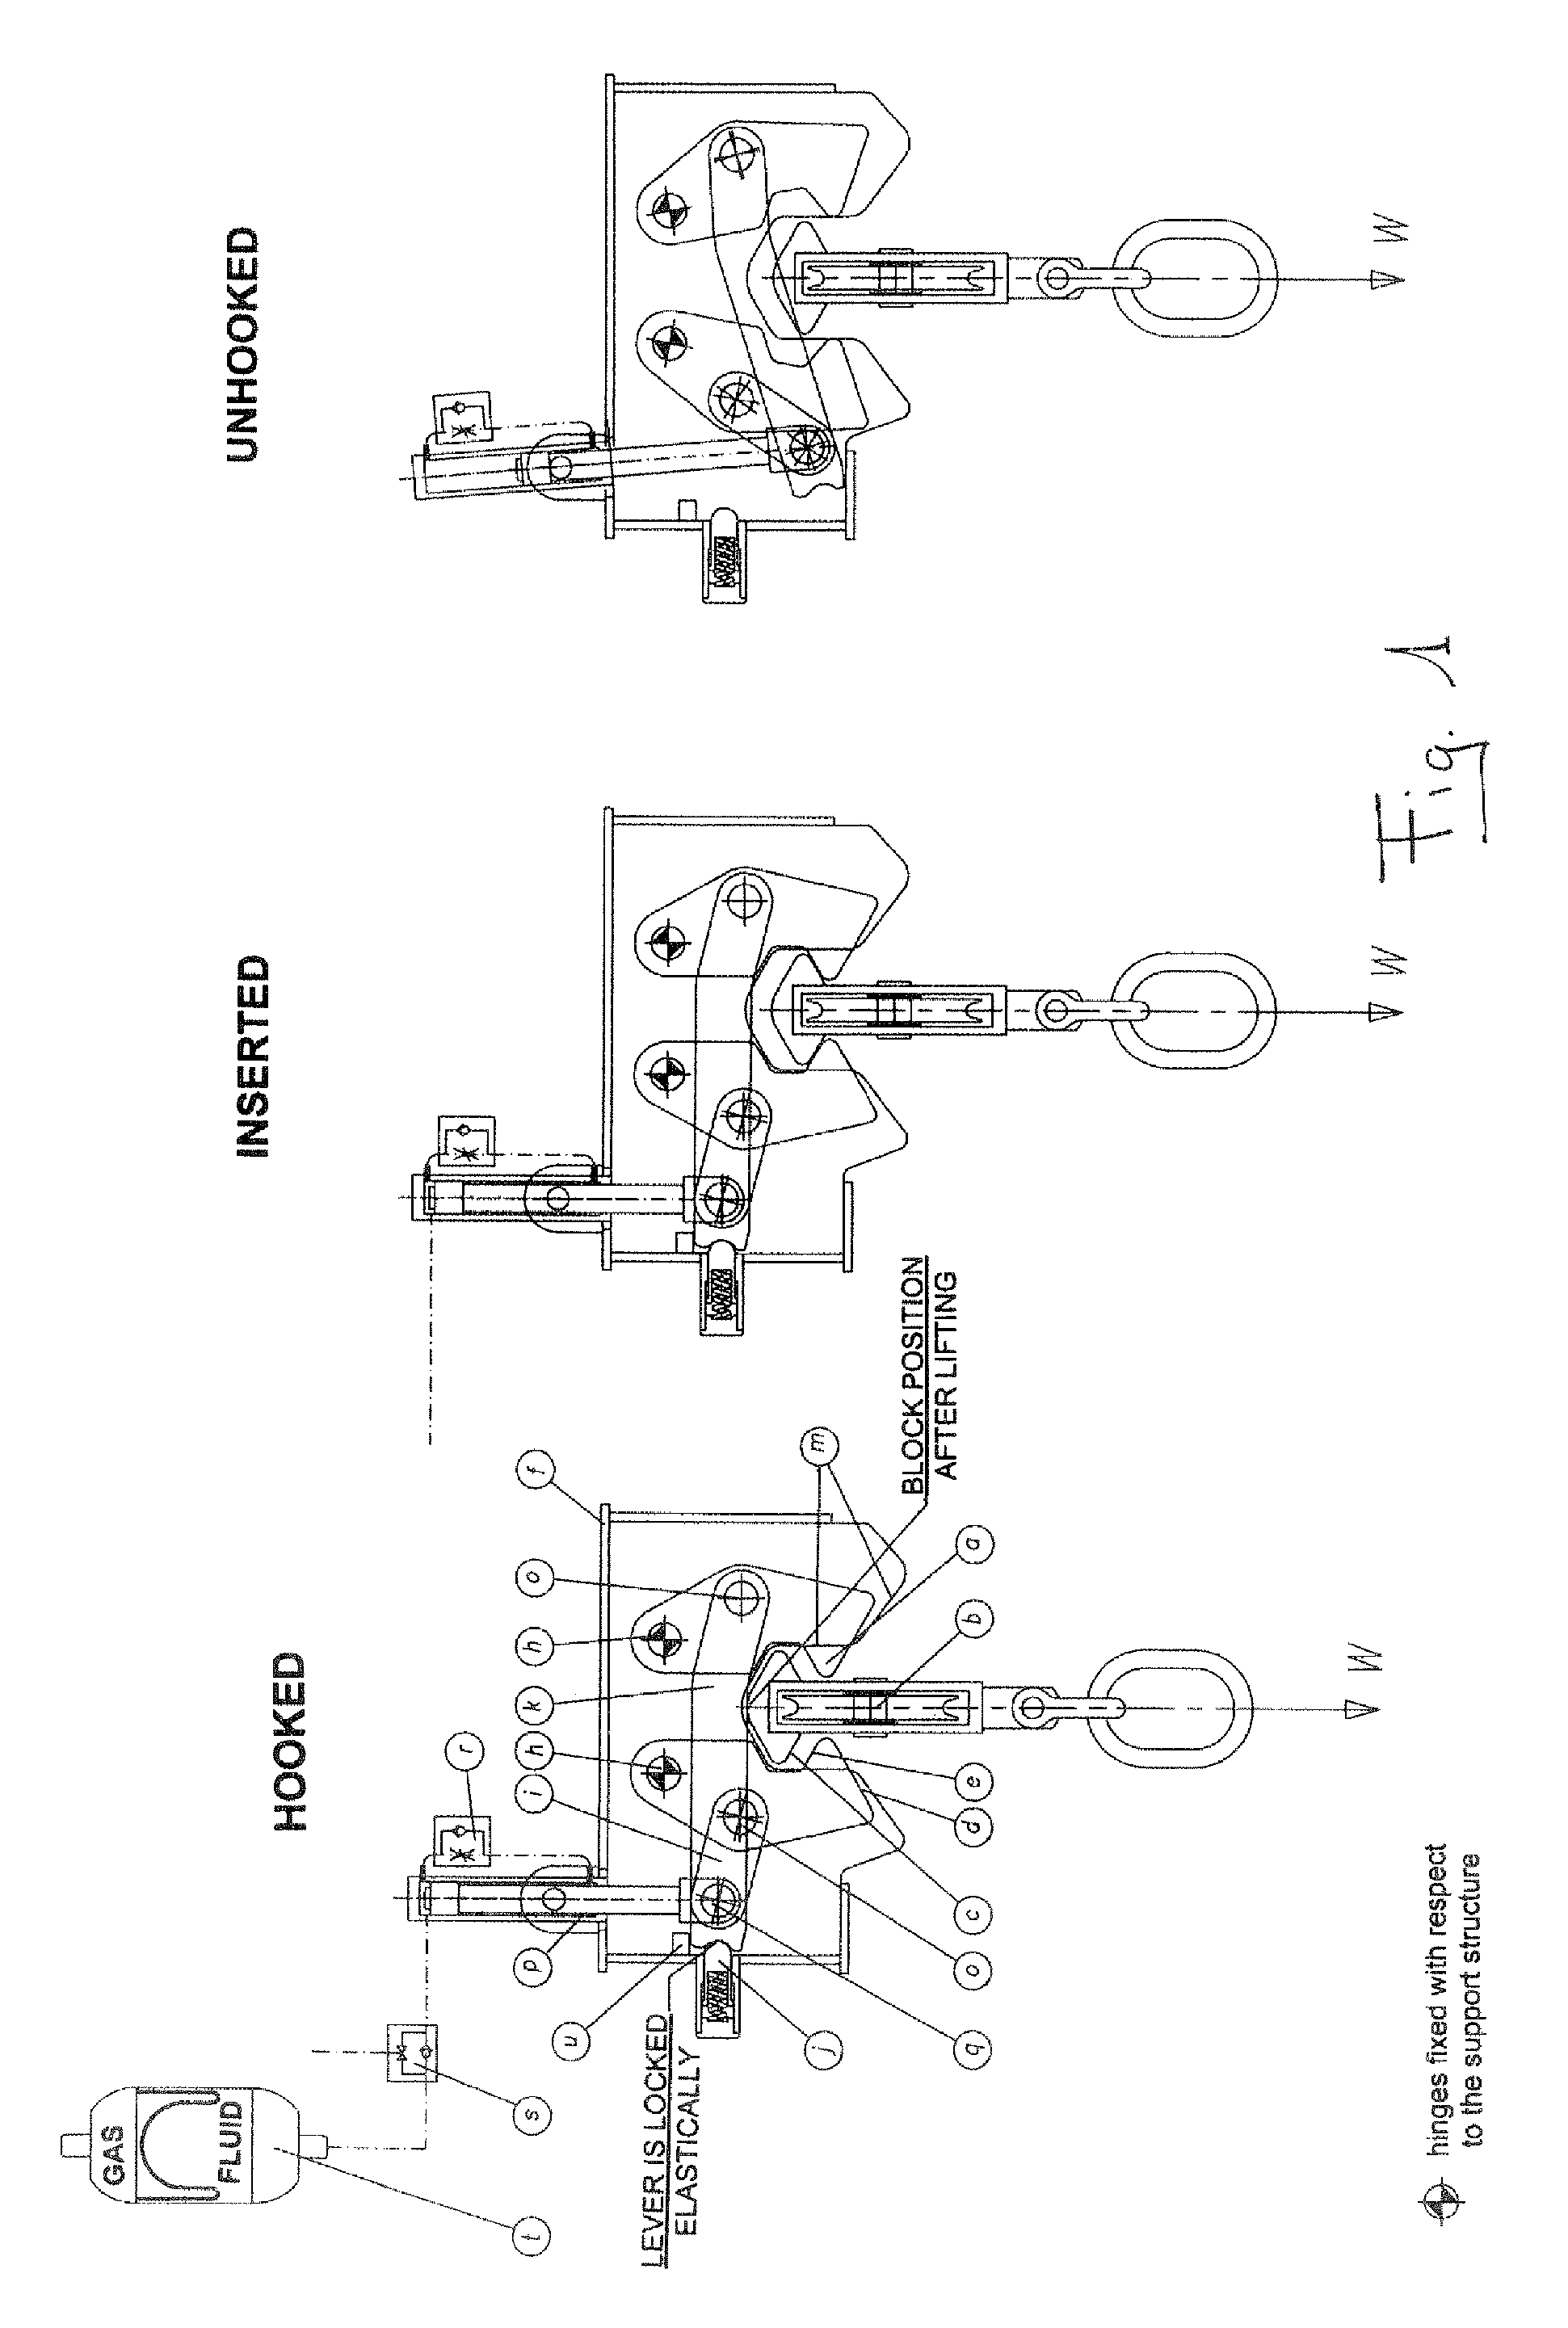 Automatic Hooking Device And Controlled Release Of Loaded Blocks